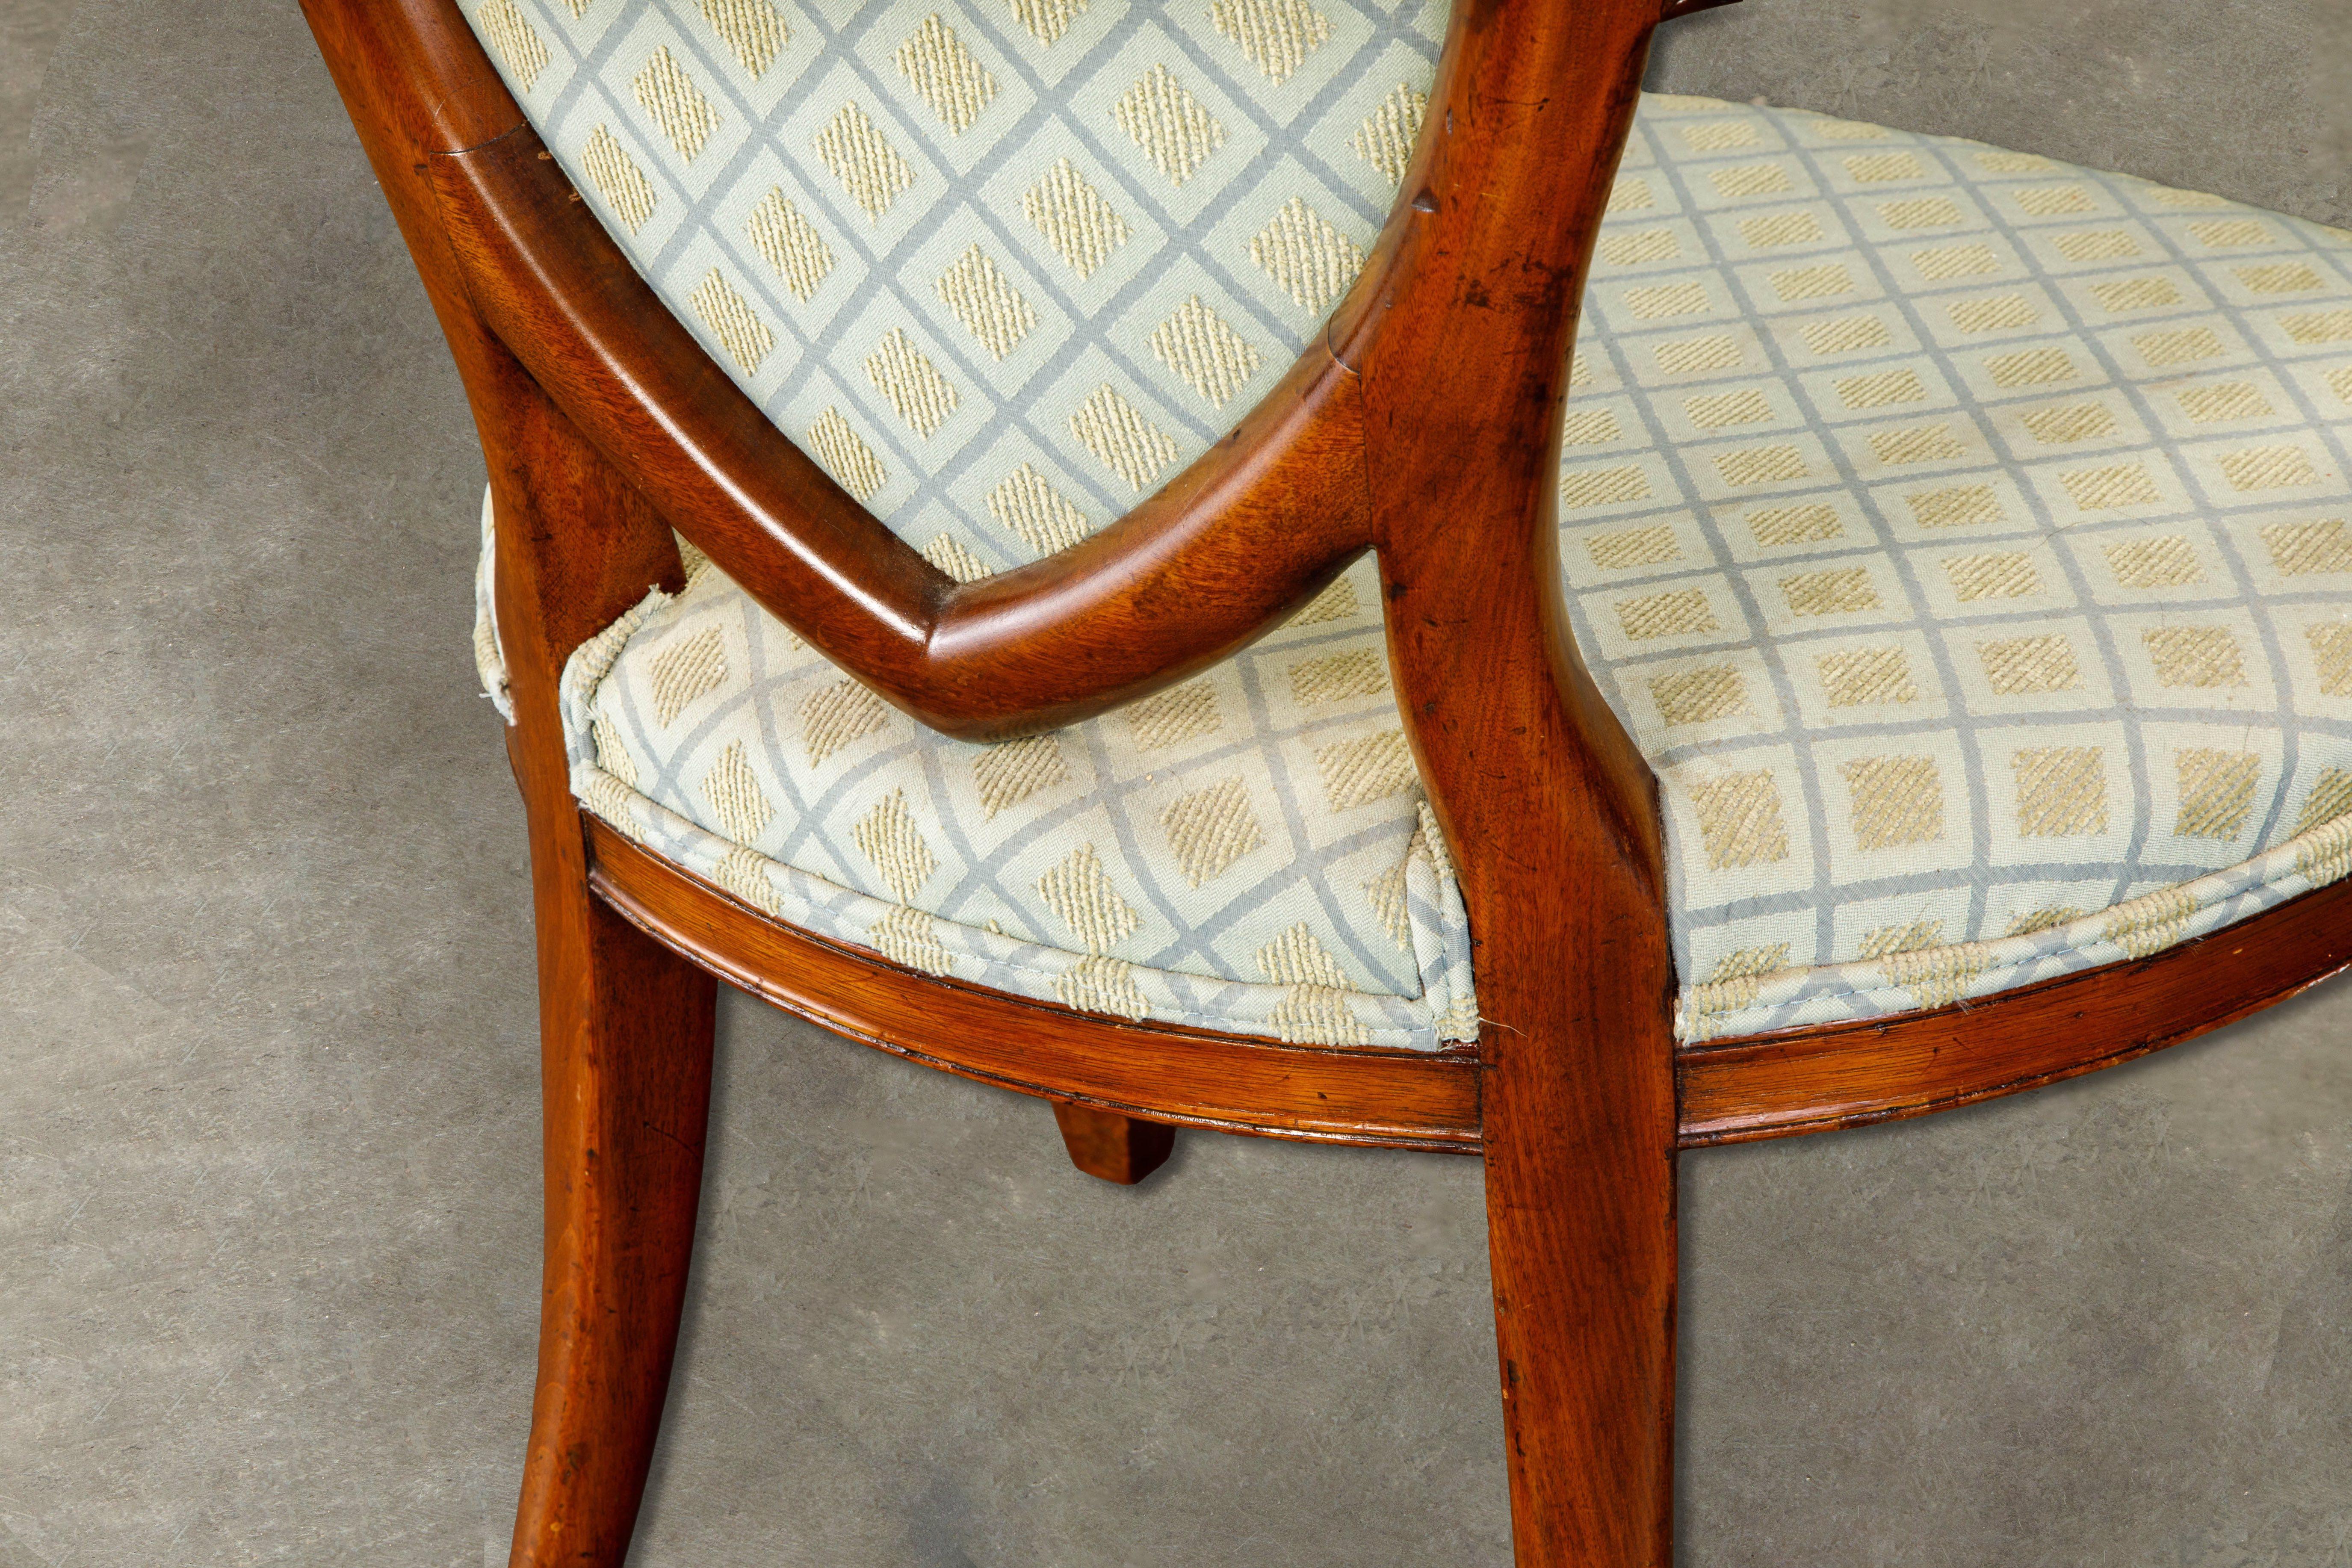 Pair of Upholstered Hepplewhite Shield-Back Armchairs w Provenance, circa 1870s For Sale 4